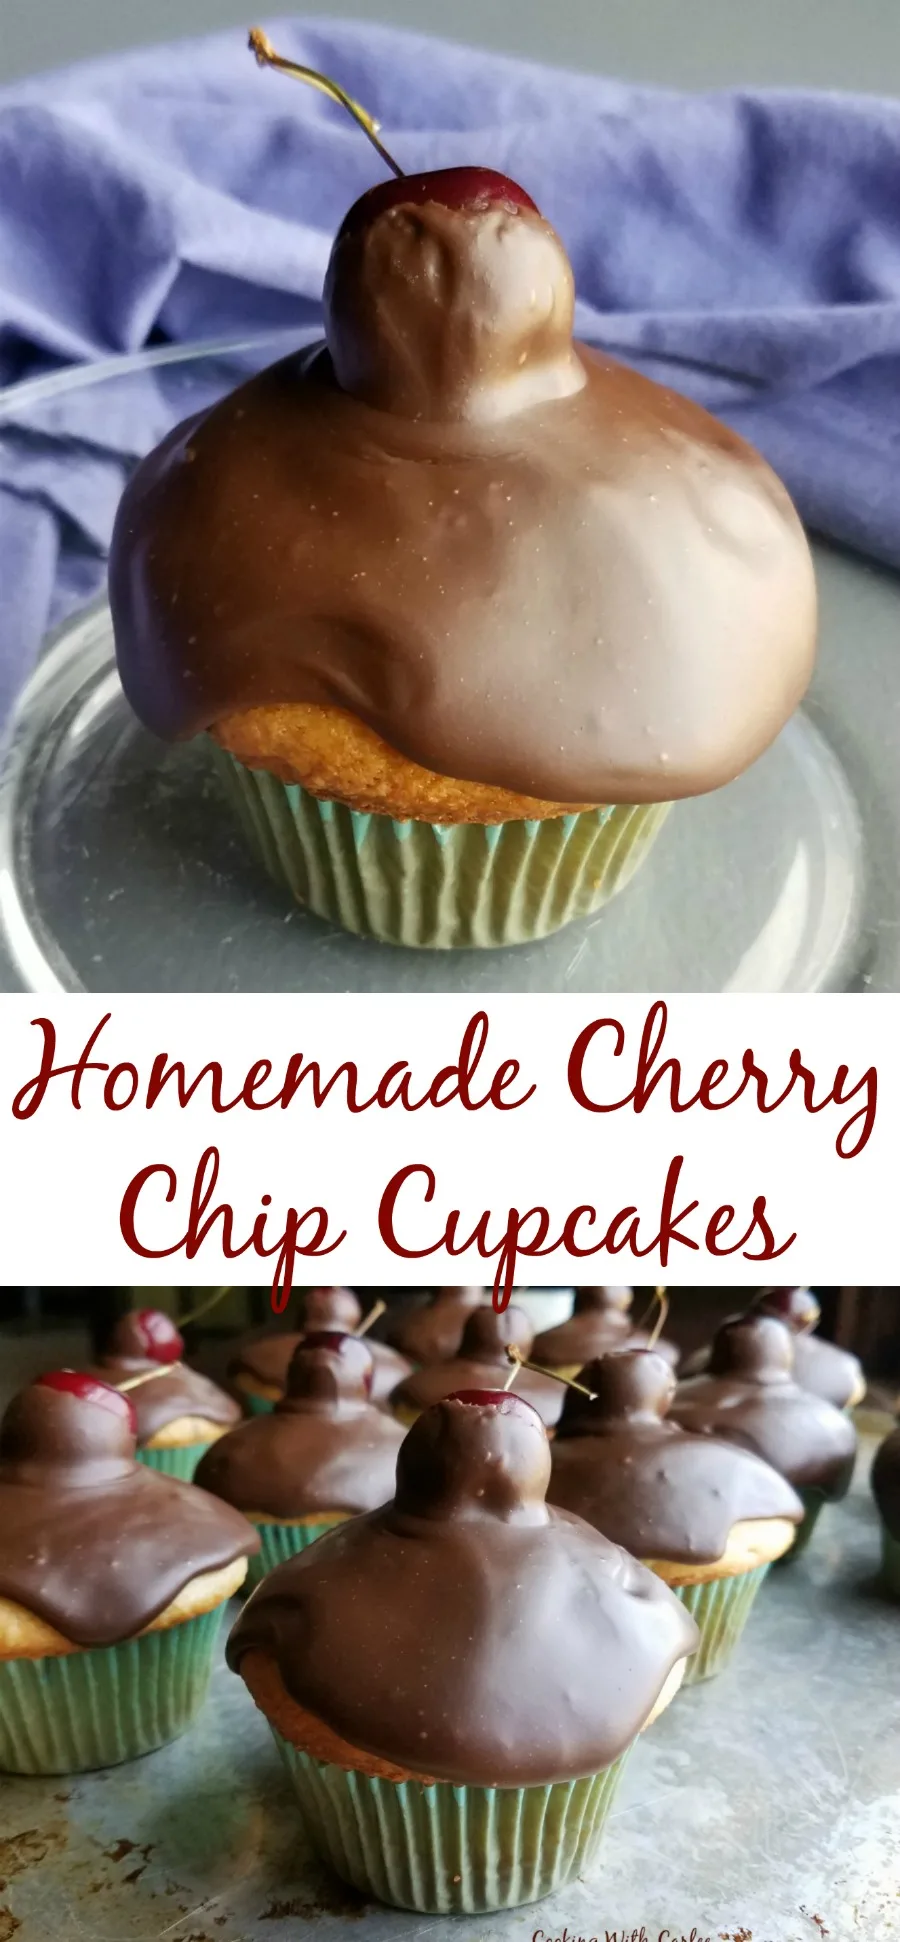 Delicious cherries and mini chocolate chips are nestled in a simple cake batter for a fun treat. Cupcakes topped with fudgy icing and loaded with cherries are hard to beat!